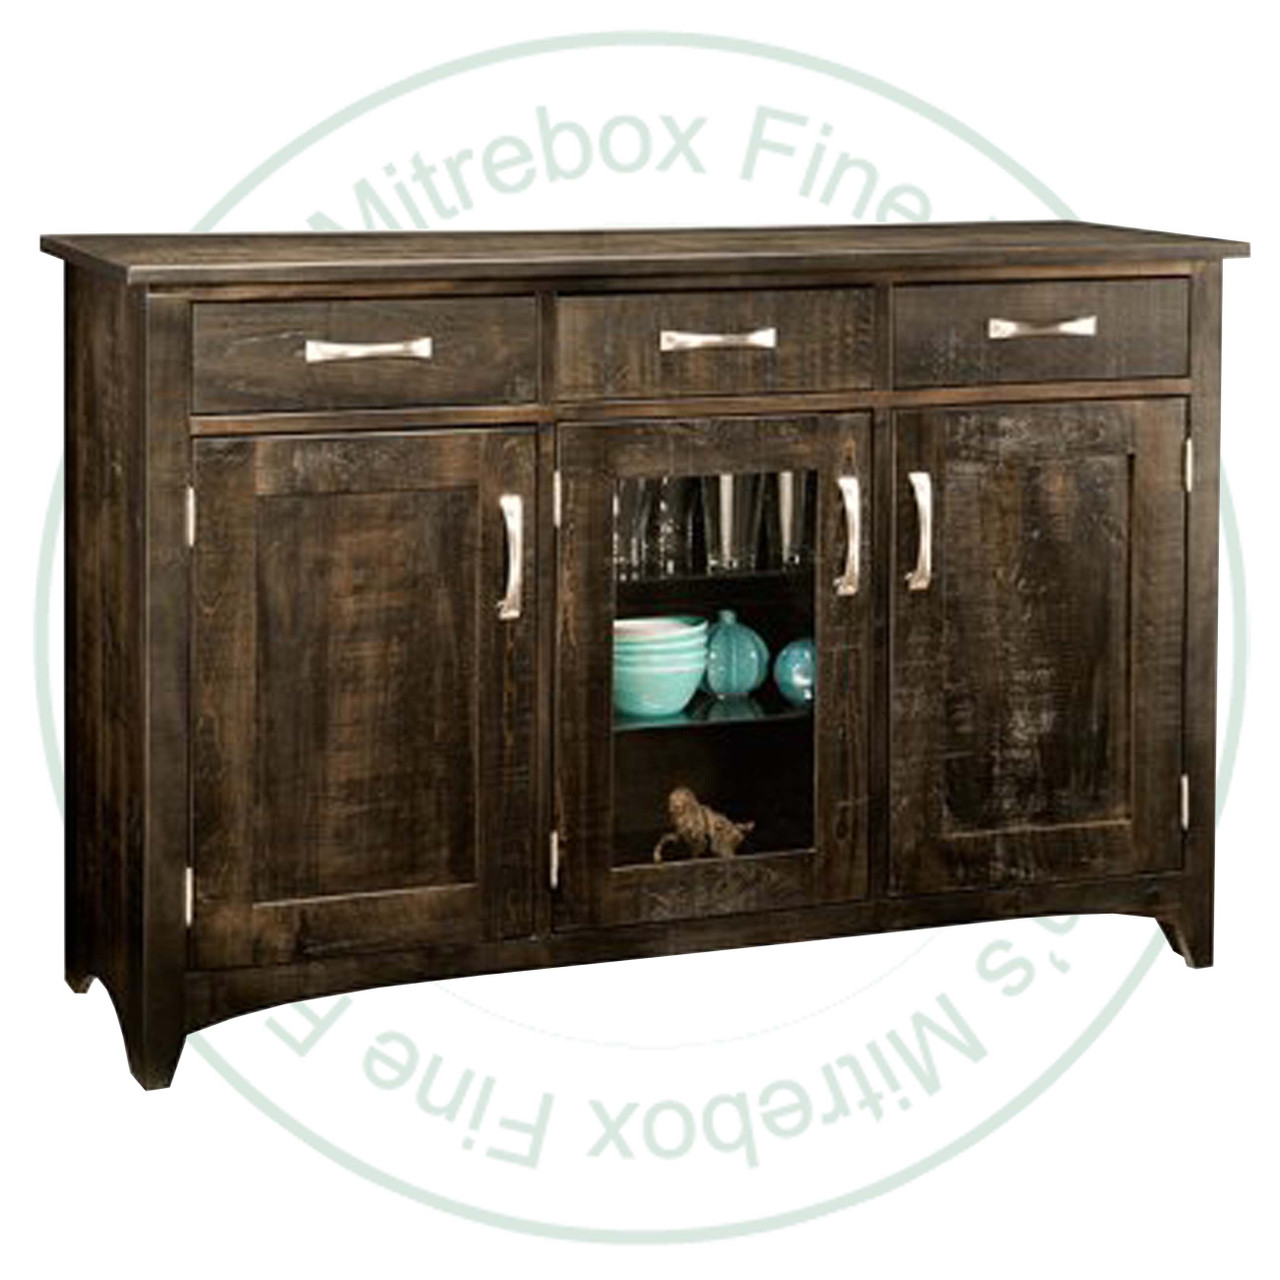 Wormy Maple Bancroft Sideboard 19''D x 59''W x 39.5''H With 2 Wood Doors 1 Glass Door And 3 Drawers